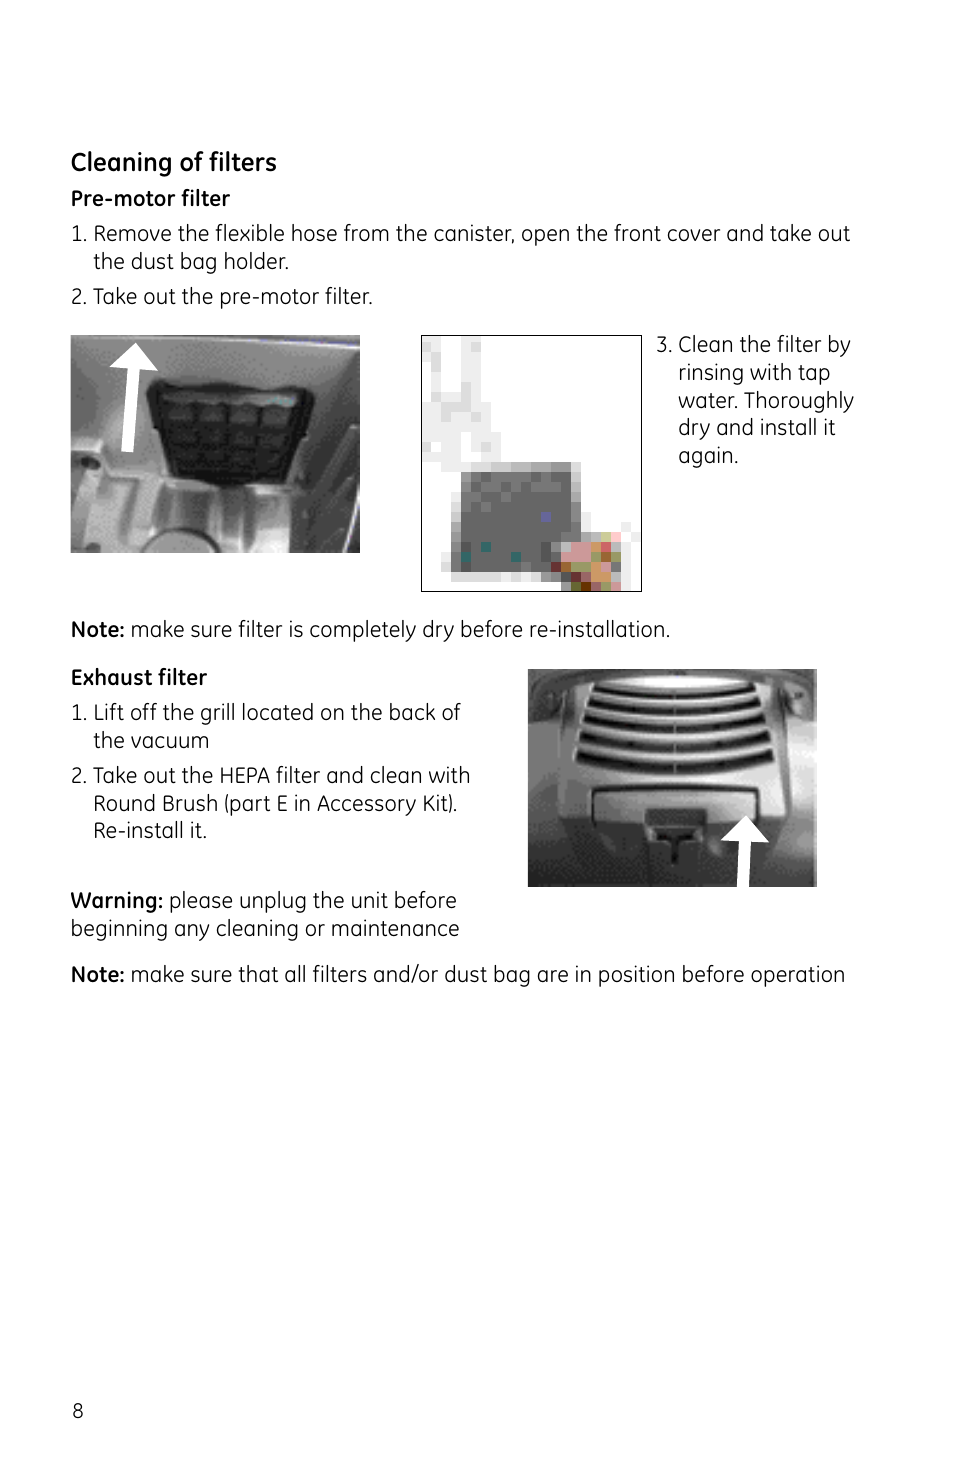 Cleaning of filters | GE 169072 User Manual | Page 8 / 10